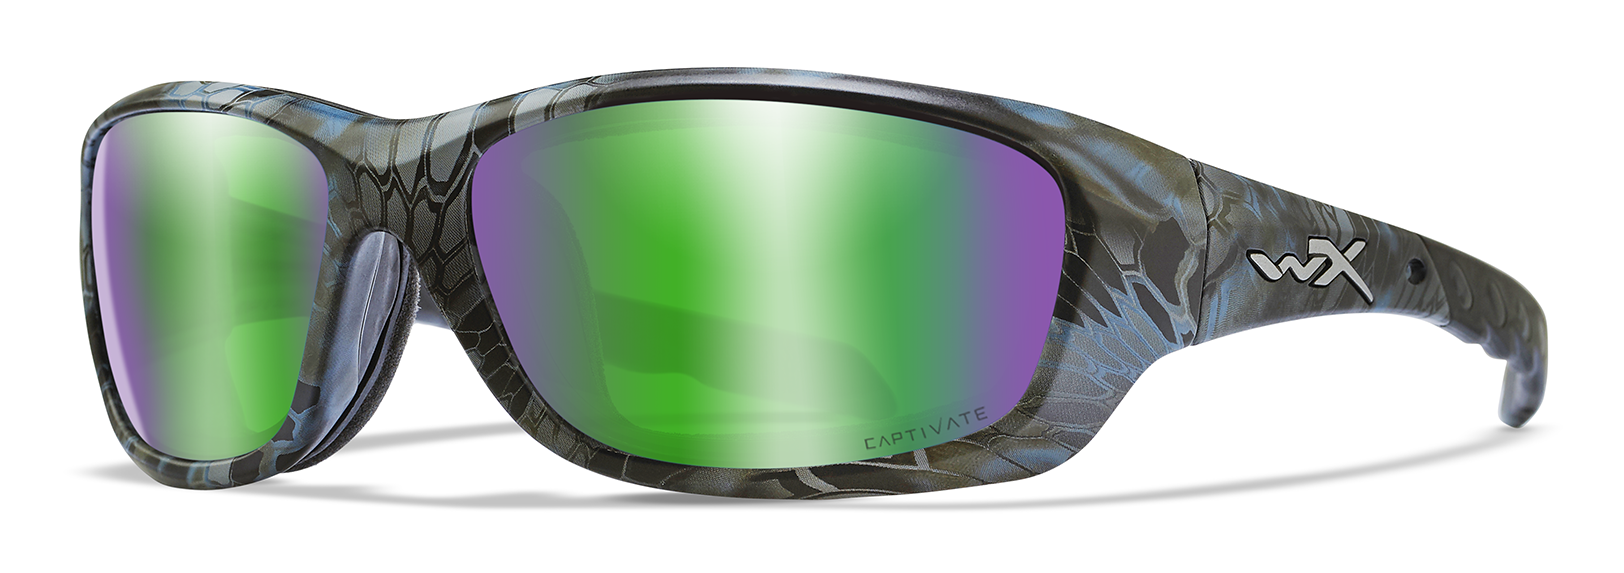 Wiley X Gravity polarized sunglasses in python grey and blue print with polarized green mirror lenses.